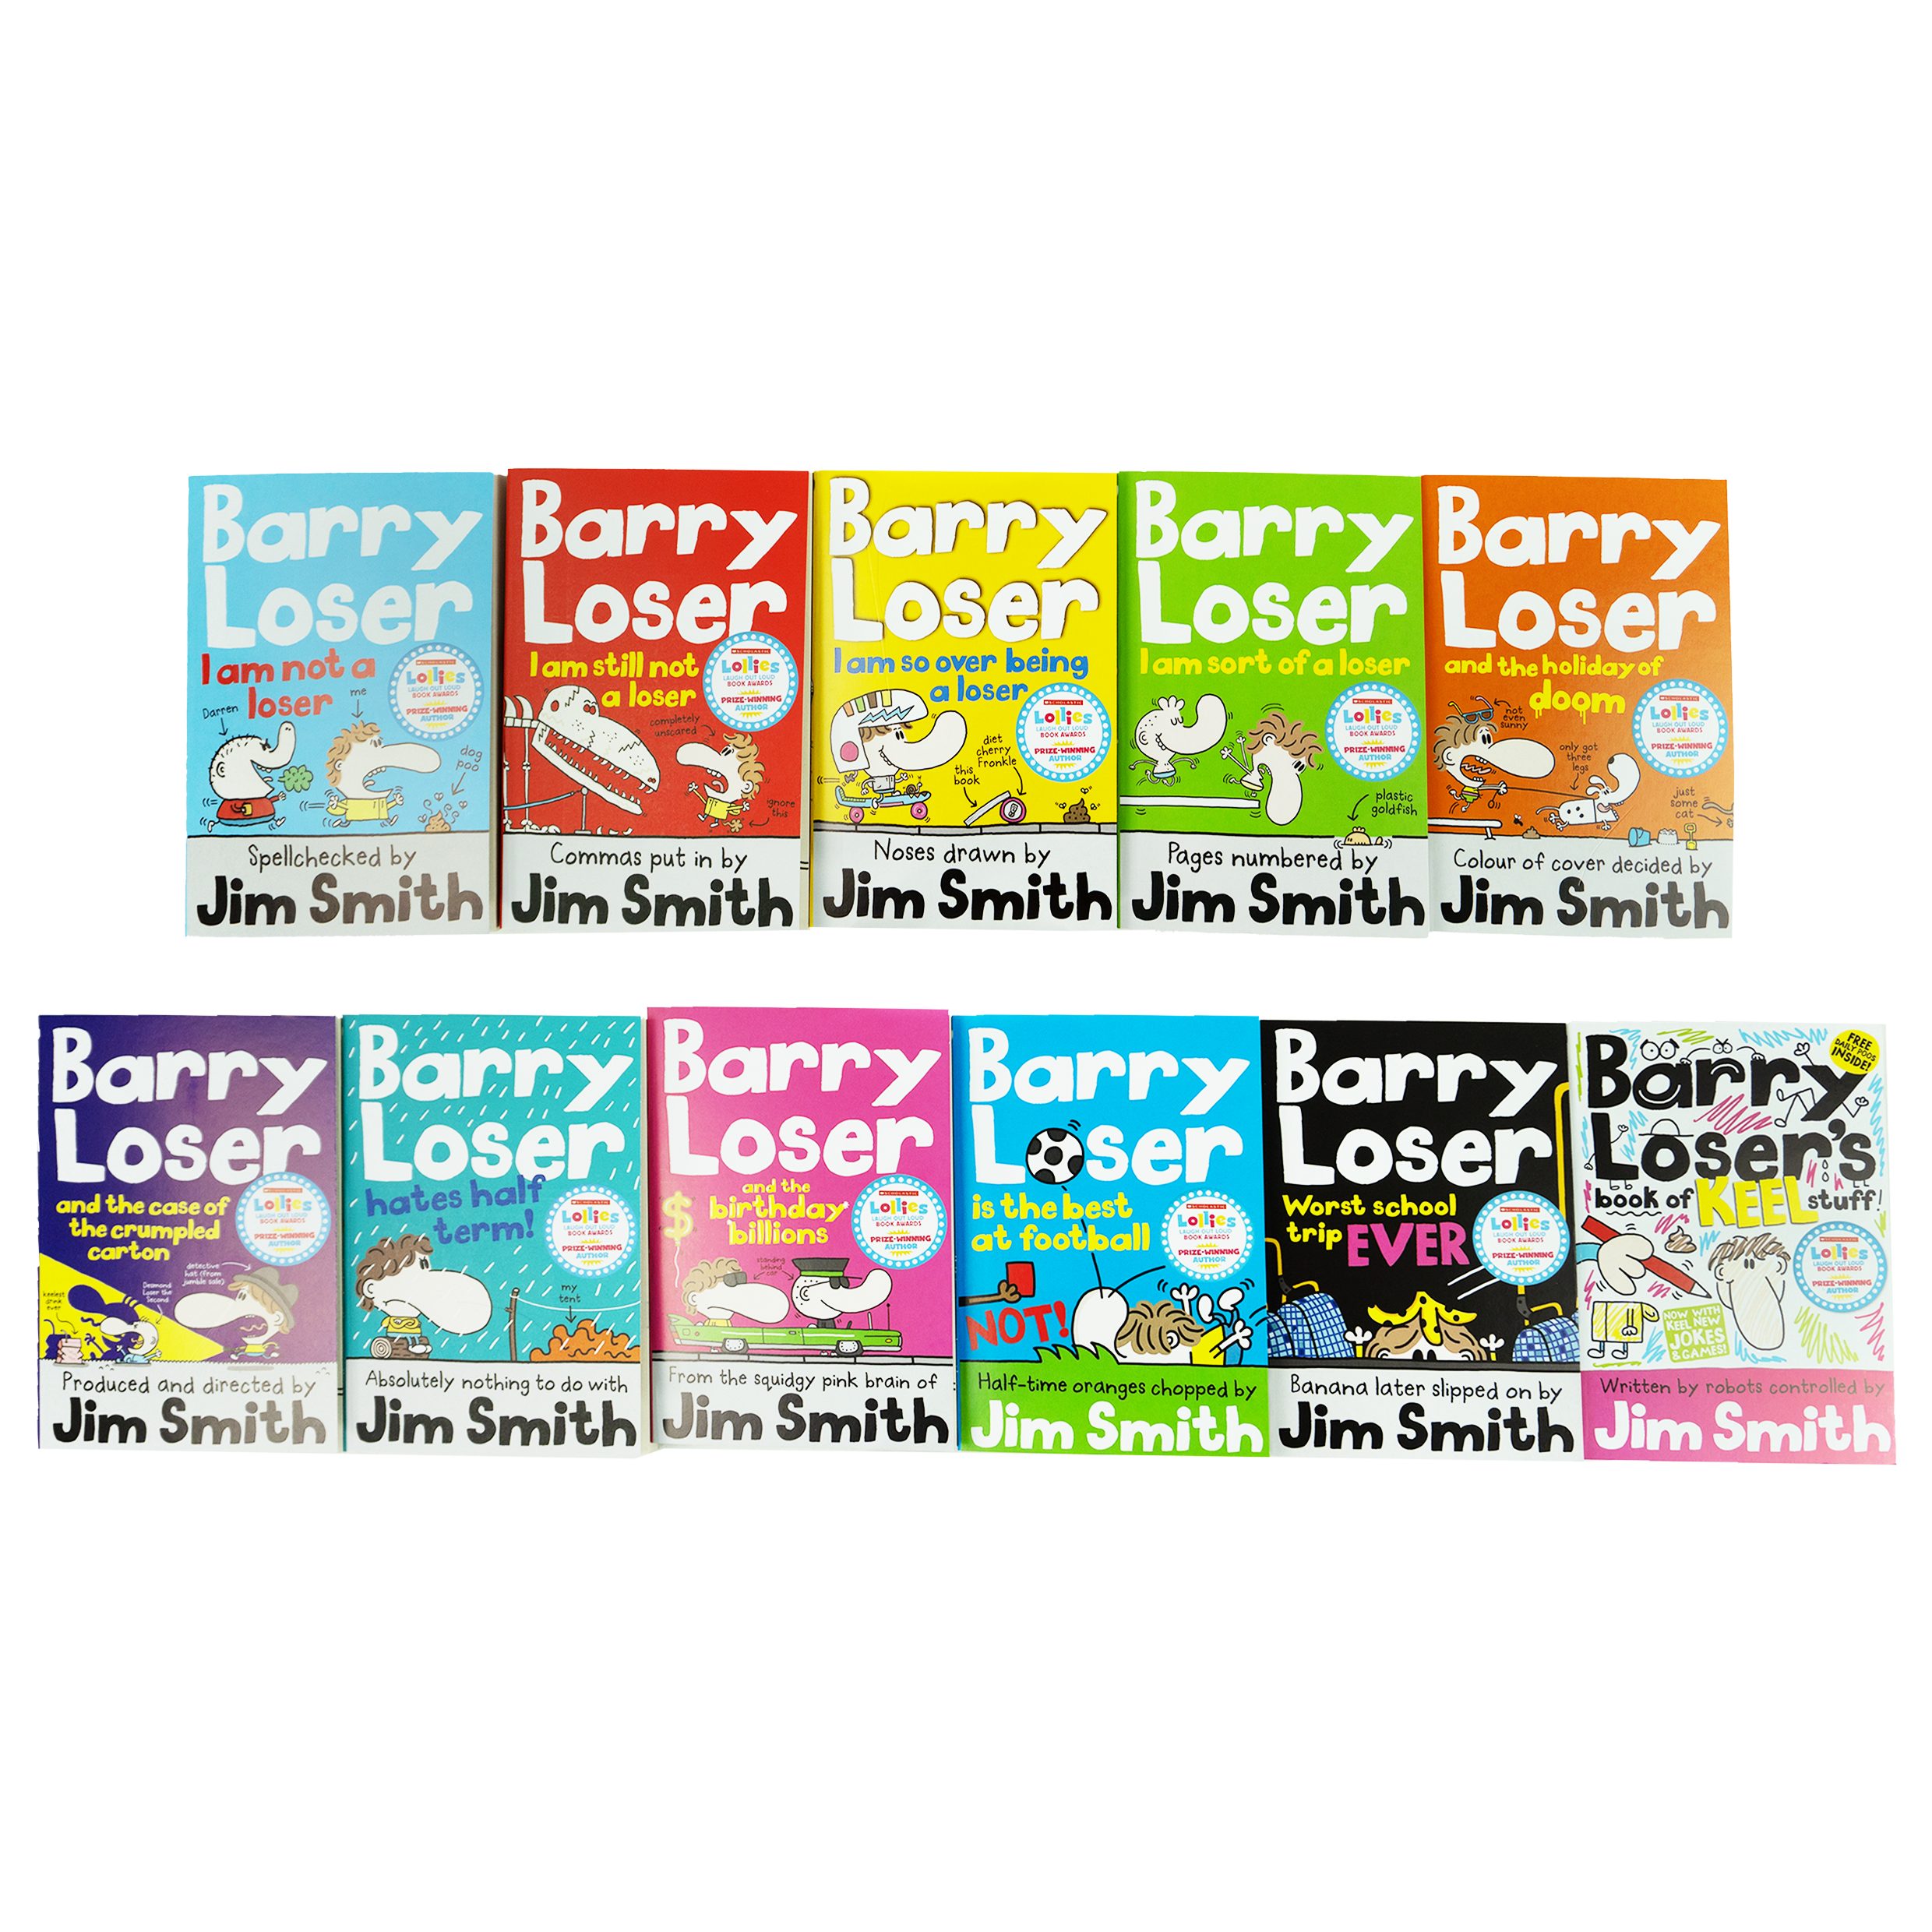 Barry Loser Series 11 Books Collection Set By Jim Smith - Ages 7-9 - Paperback